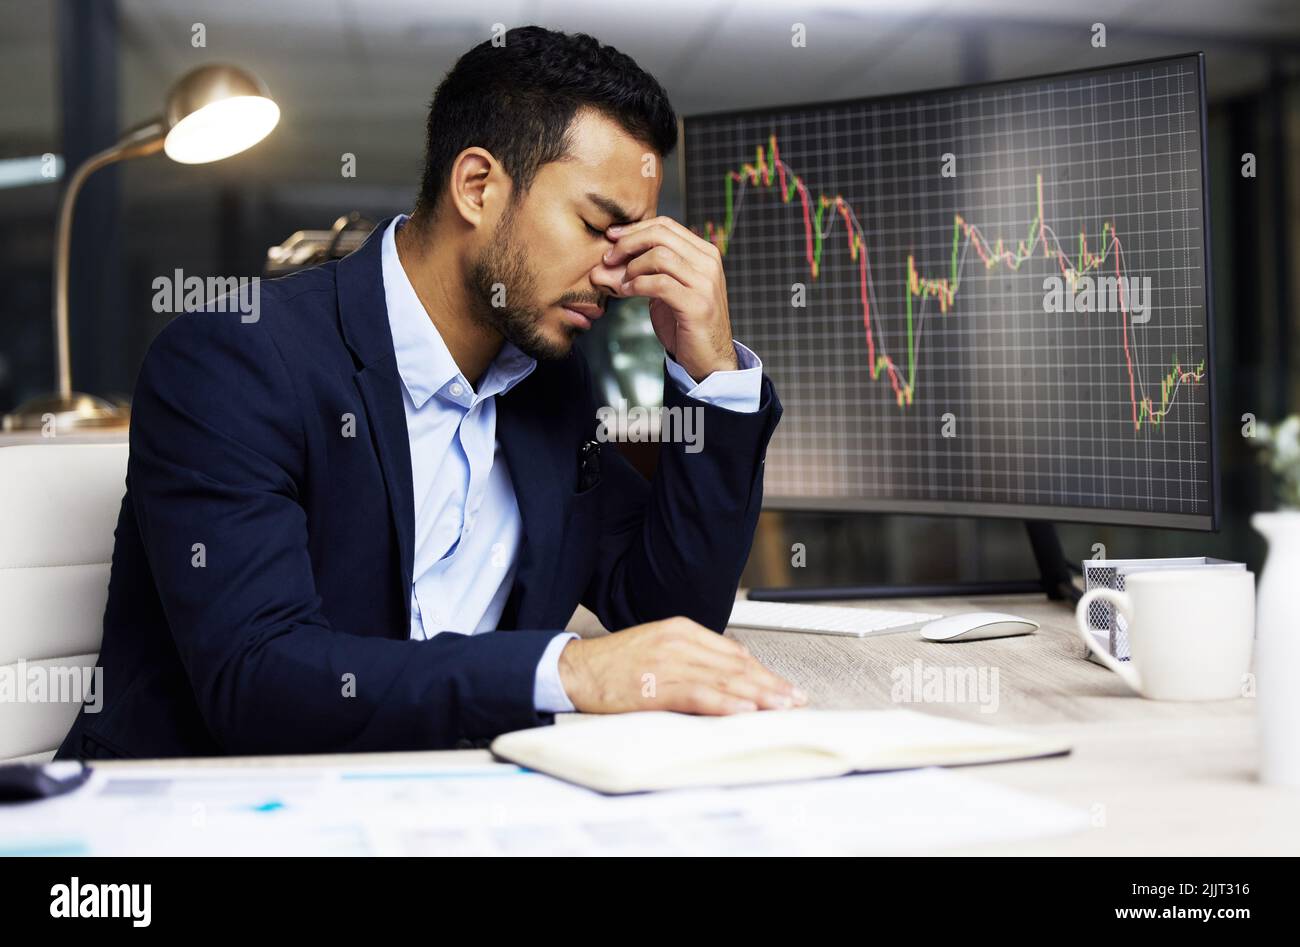 Businessman with depression analysing the stock market and trading during a financial crisis. Stressed trader in a bear market, looking at stocks Stock Photo